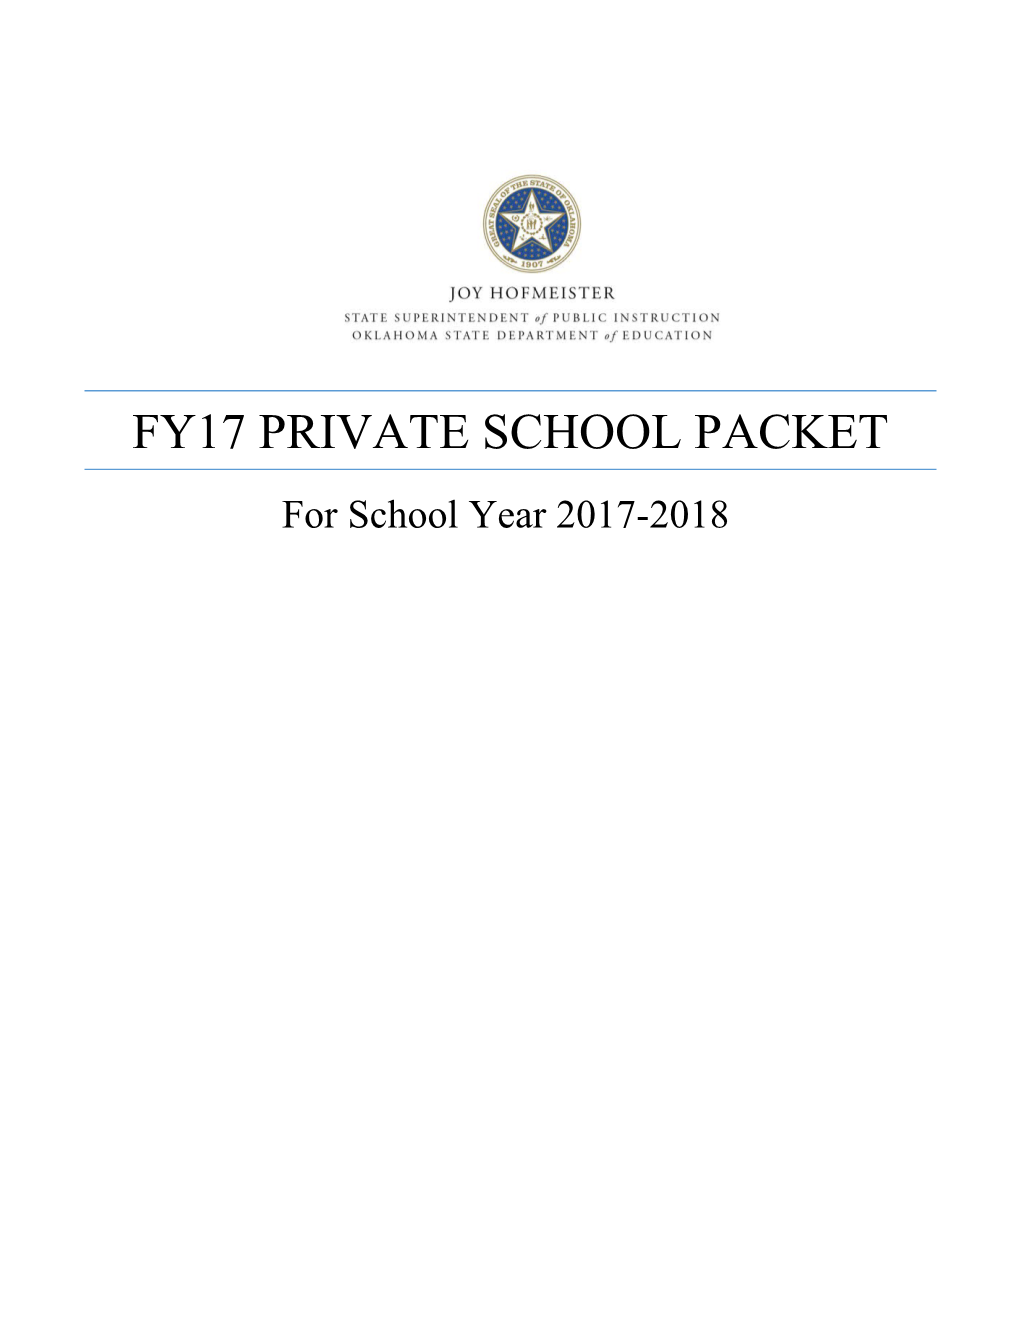 FY17 Private School Packet